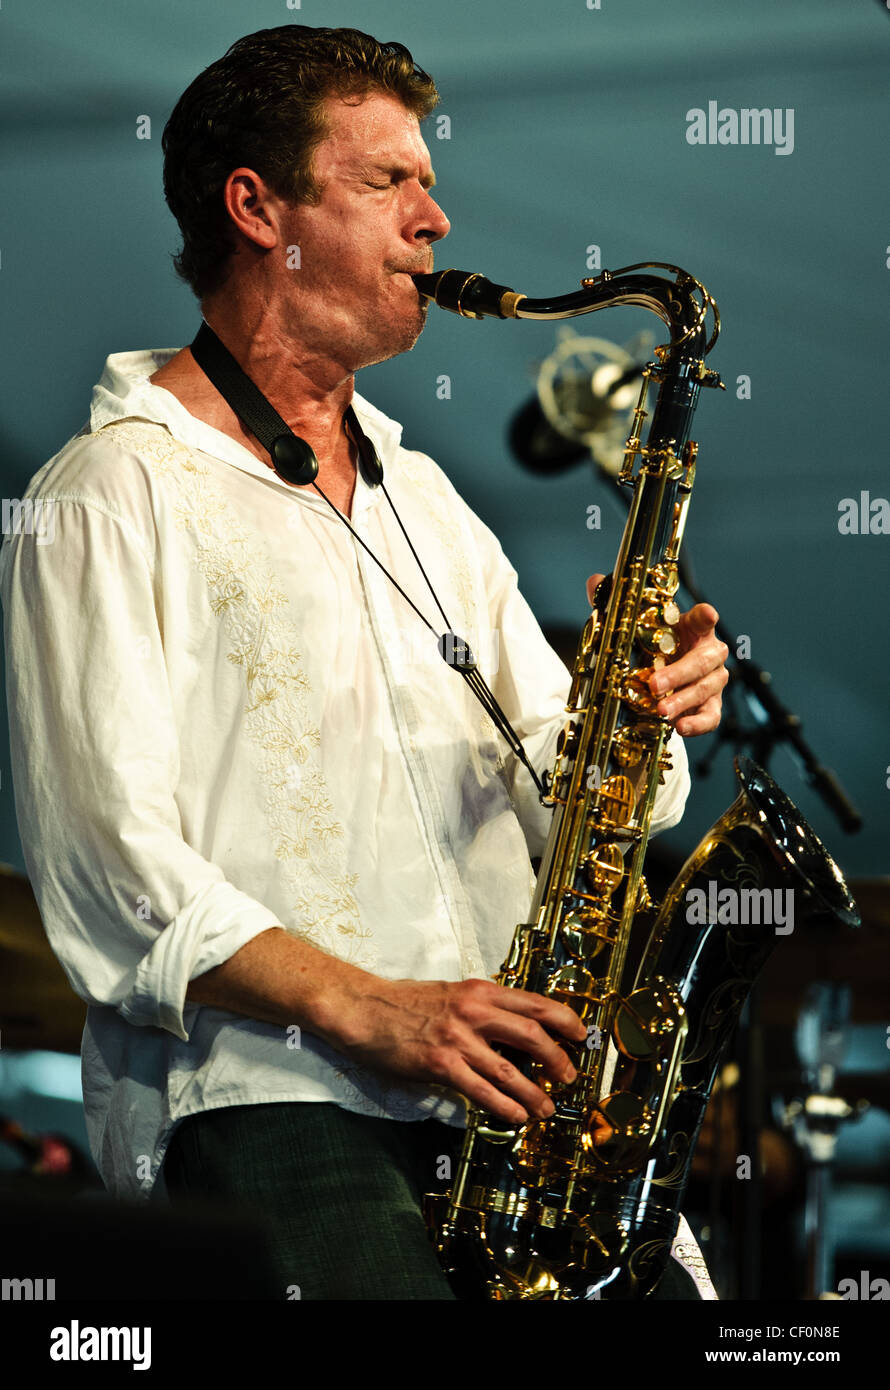 Terence Blanchard's Set at Jazz Fest 2011 in New Orleans, LA on day 3. Stock Photo